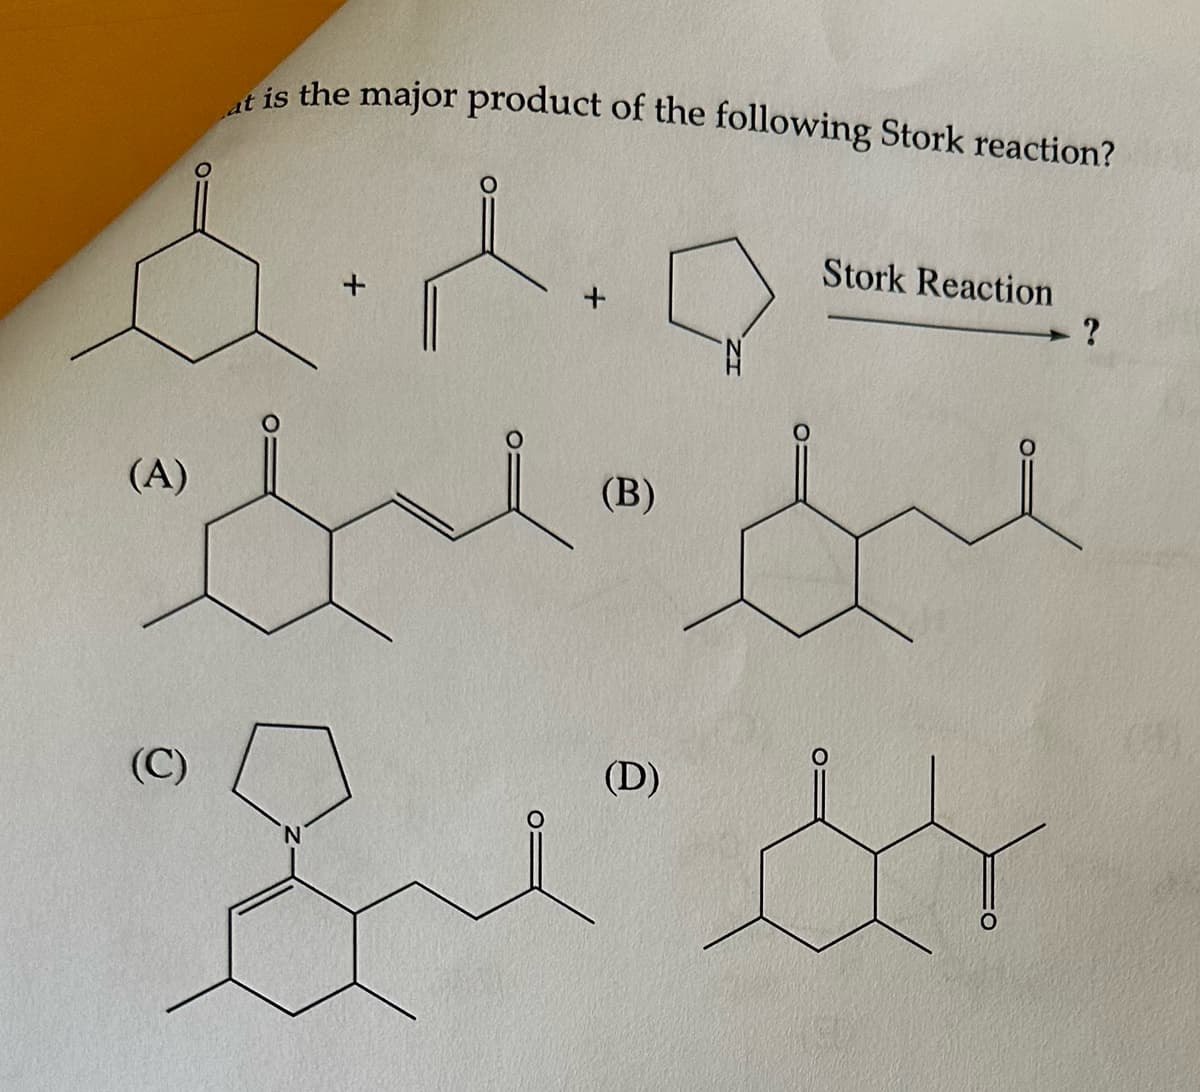 6.2.Q
(A)
it is the major product of the following Stork reaction?
(C)
(B)
Sue St
Stork Reaction
(D)
?